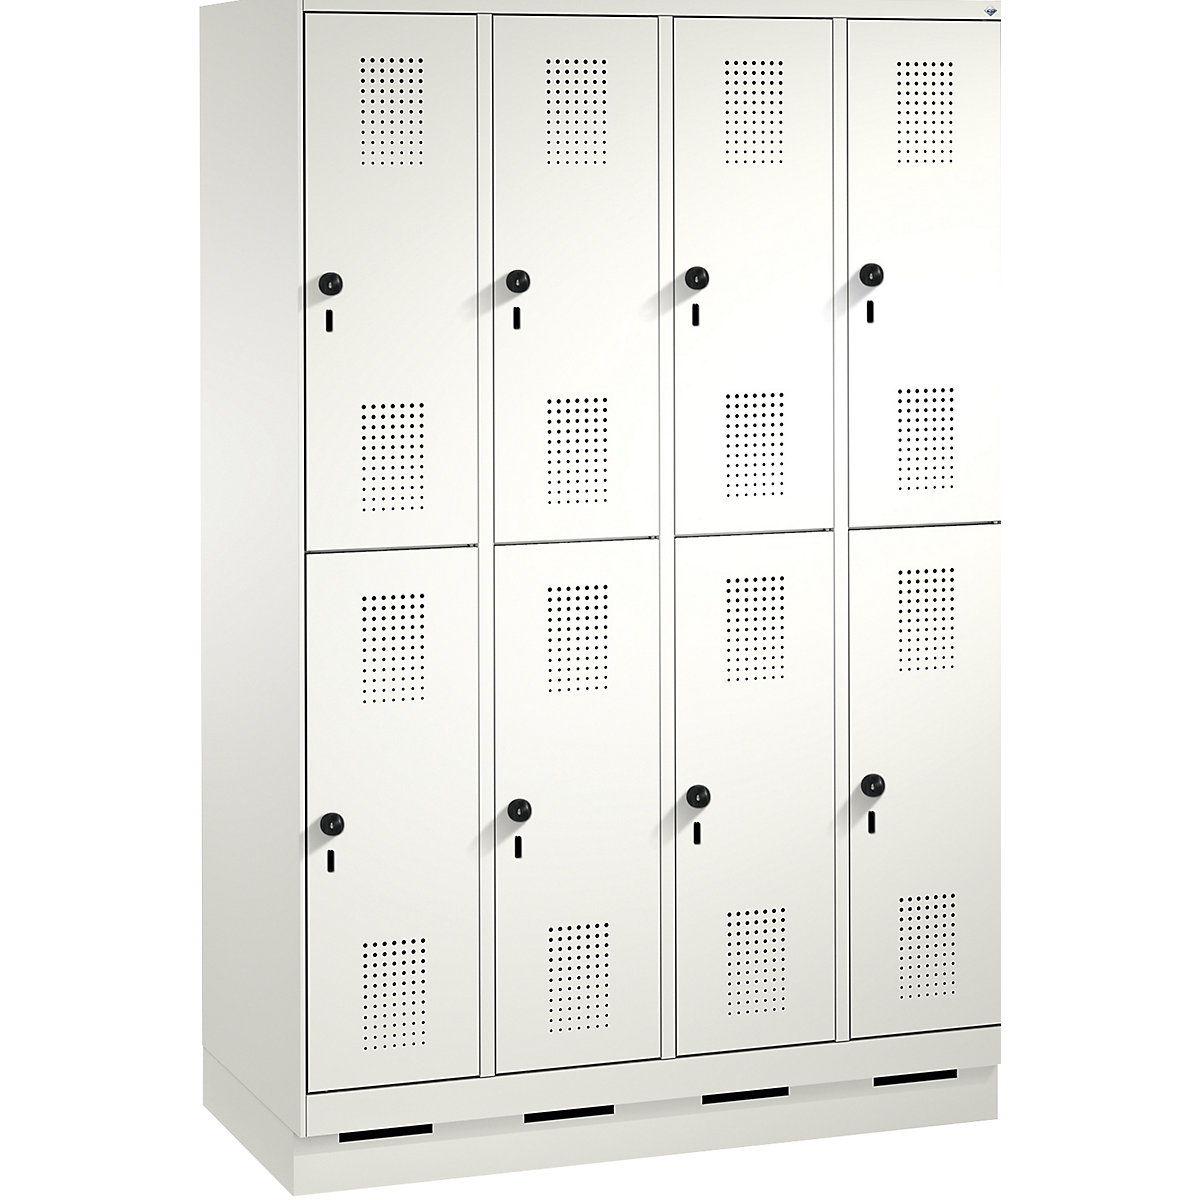 EVOLO cloakroom locker, double tier, with plinth – C+P, 4 compartments, 2 shelf compartments each, compartment width 300 mm, traffic white / traffic white-12